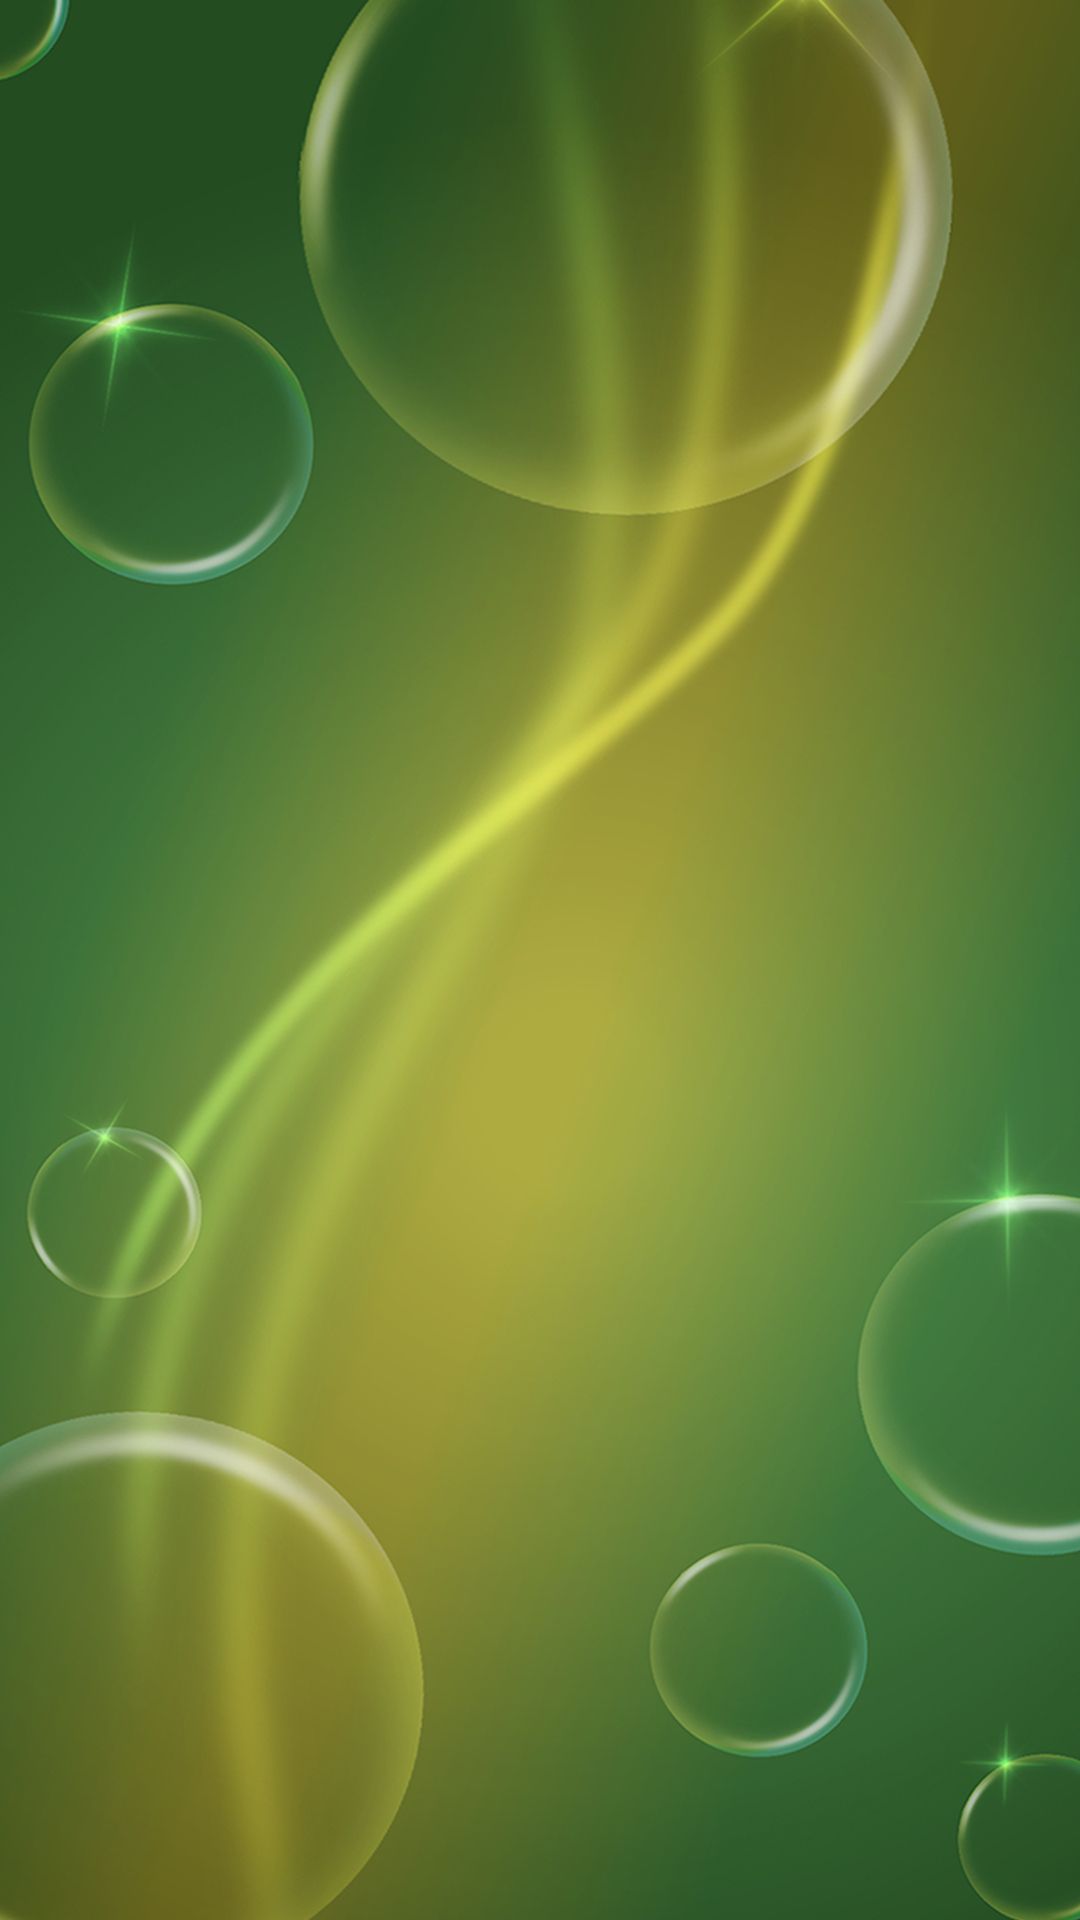 Light Shiny Bubbles With Green Gradient Background, 1080*1920 (9 16). # Wallpaper #creative #background #ipho. Bubbles Background, Bubbles Wallpaper, Green Bubbles